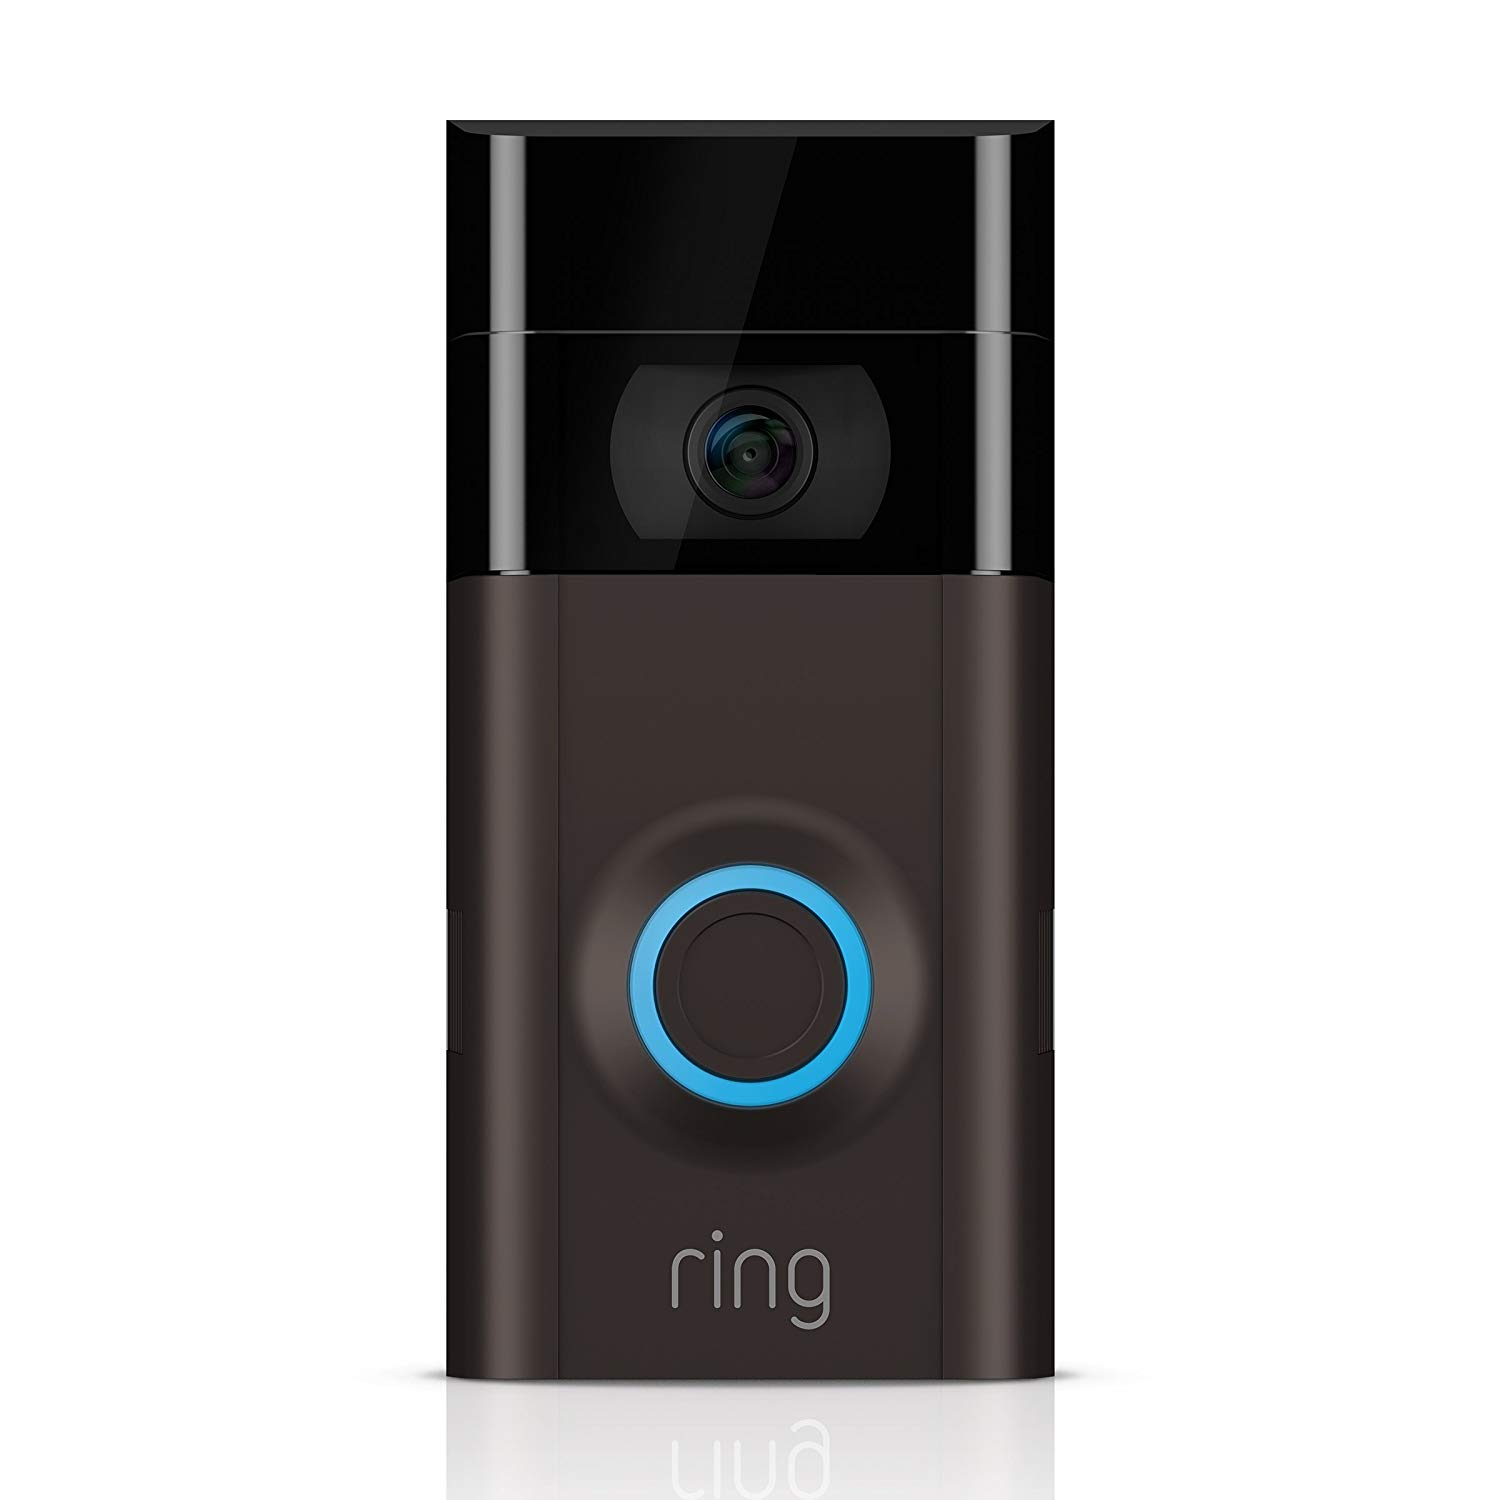 can a ring doorbell be hardwired